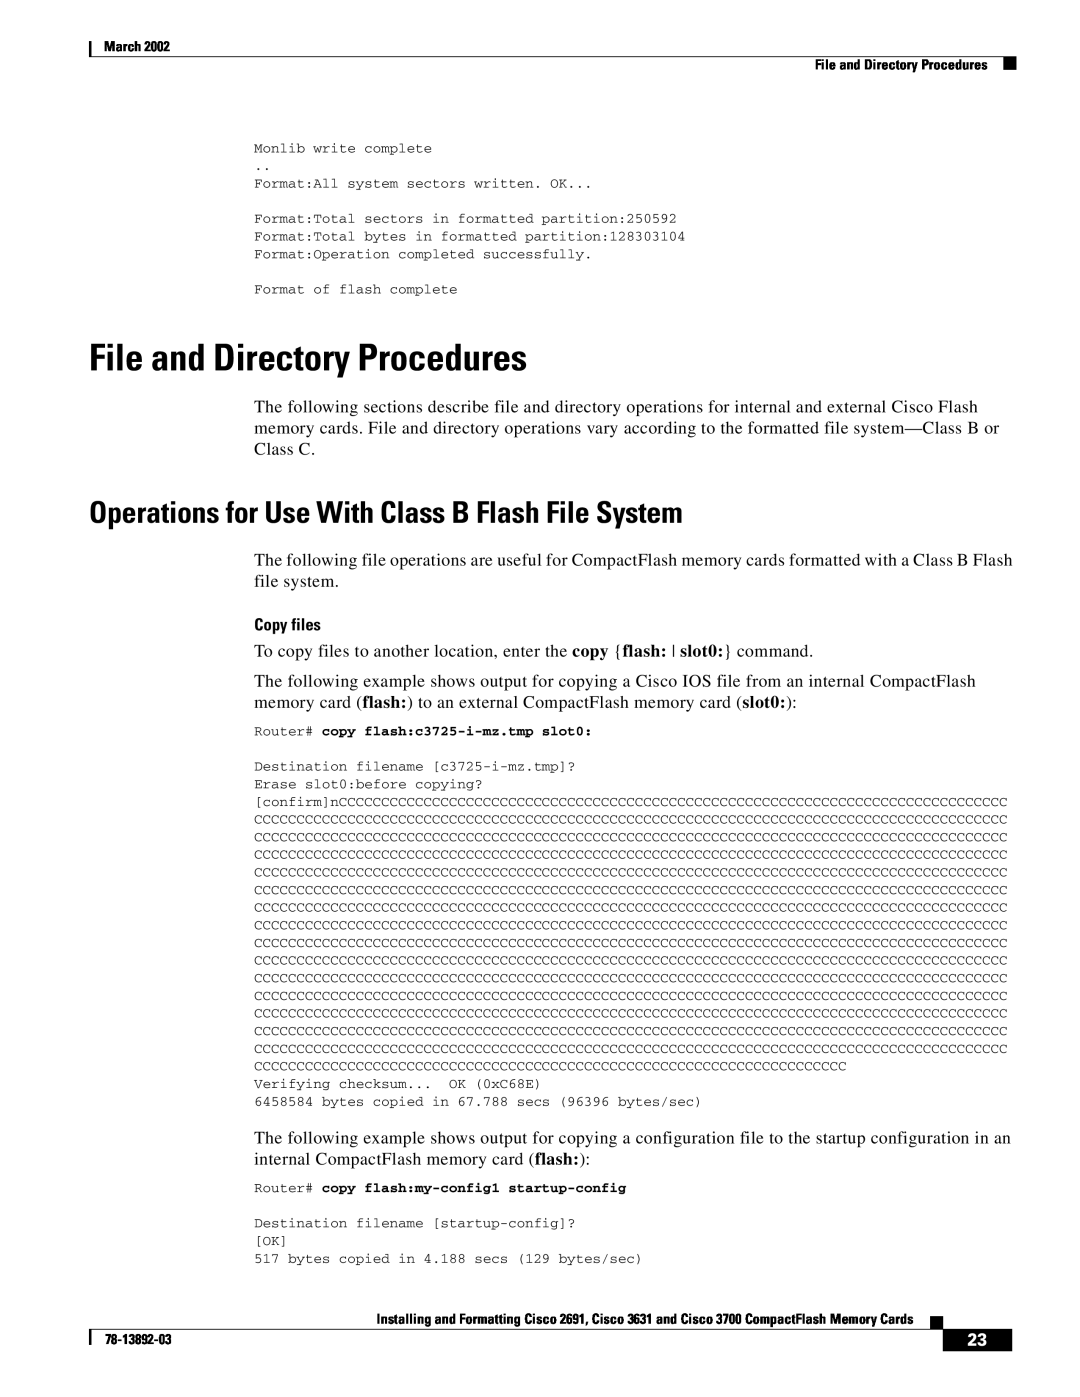 Cisco Systems 2691, 3631 manual File and Directory Procedures, Operations for Use With Class B Flash File System 